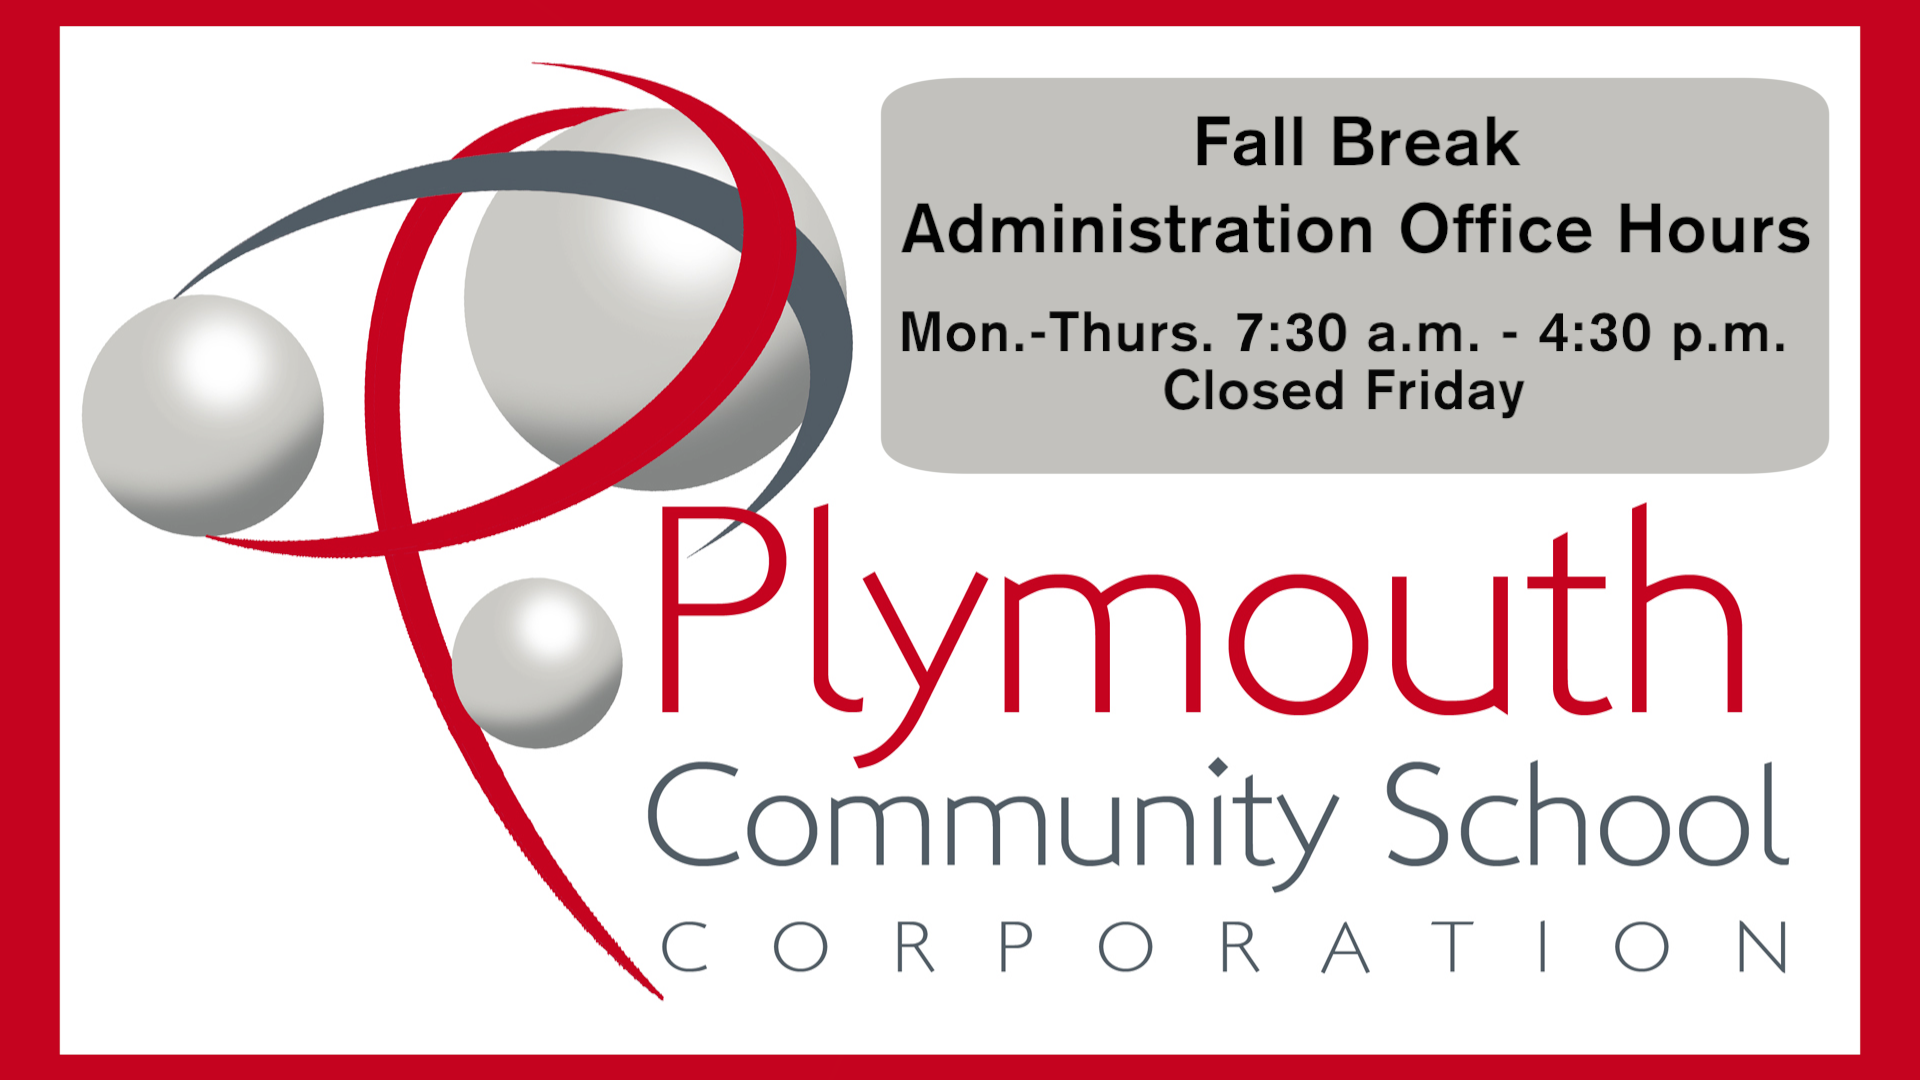 Administration Office Hours during fall break